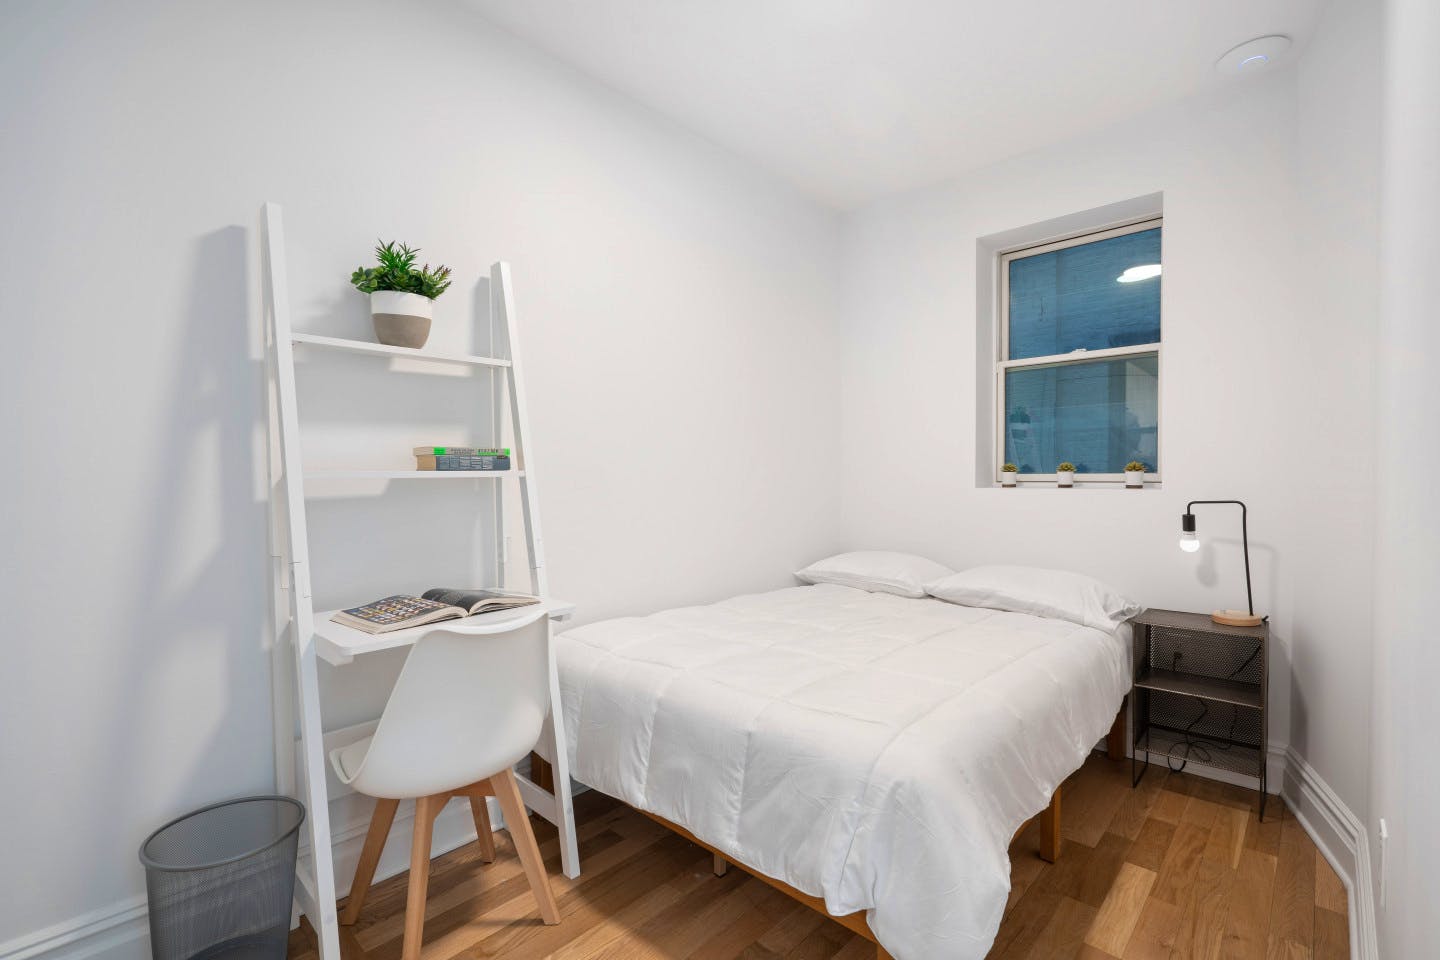 Stunning Bright Apt. w/ Terrace and Lounge Areas near Greenpoint Metro Station